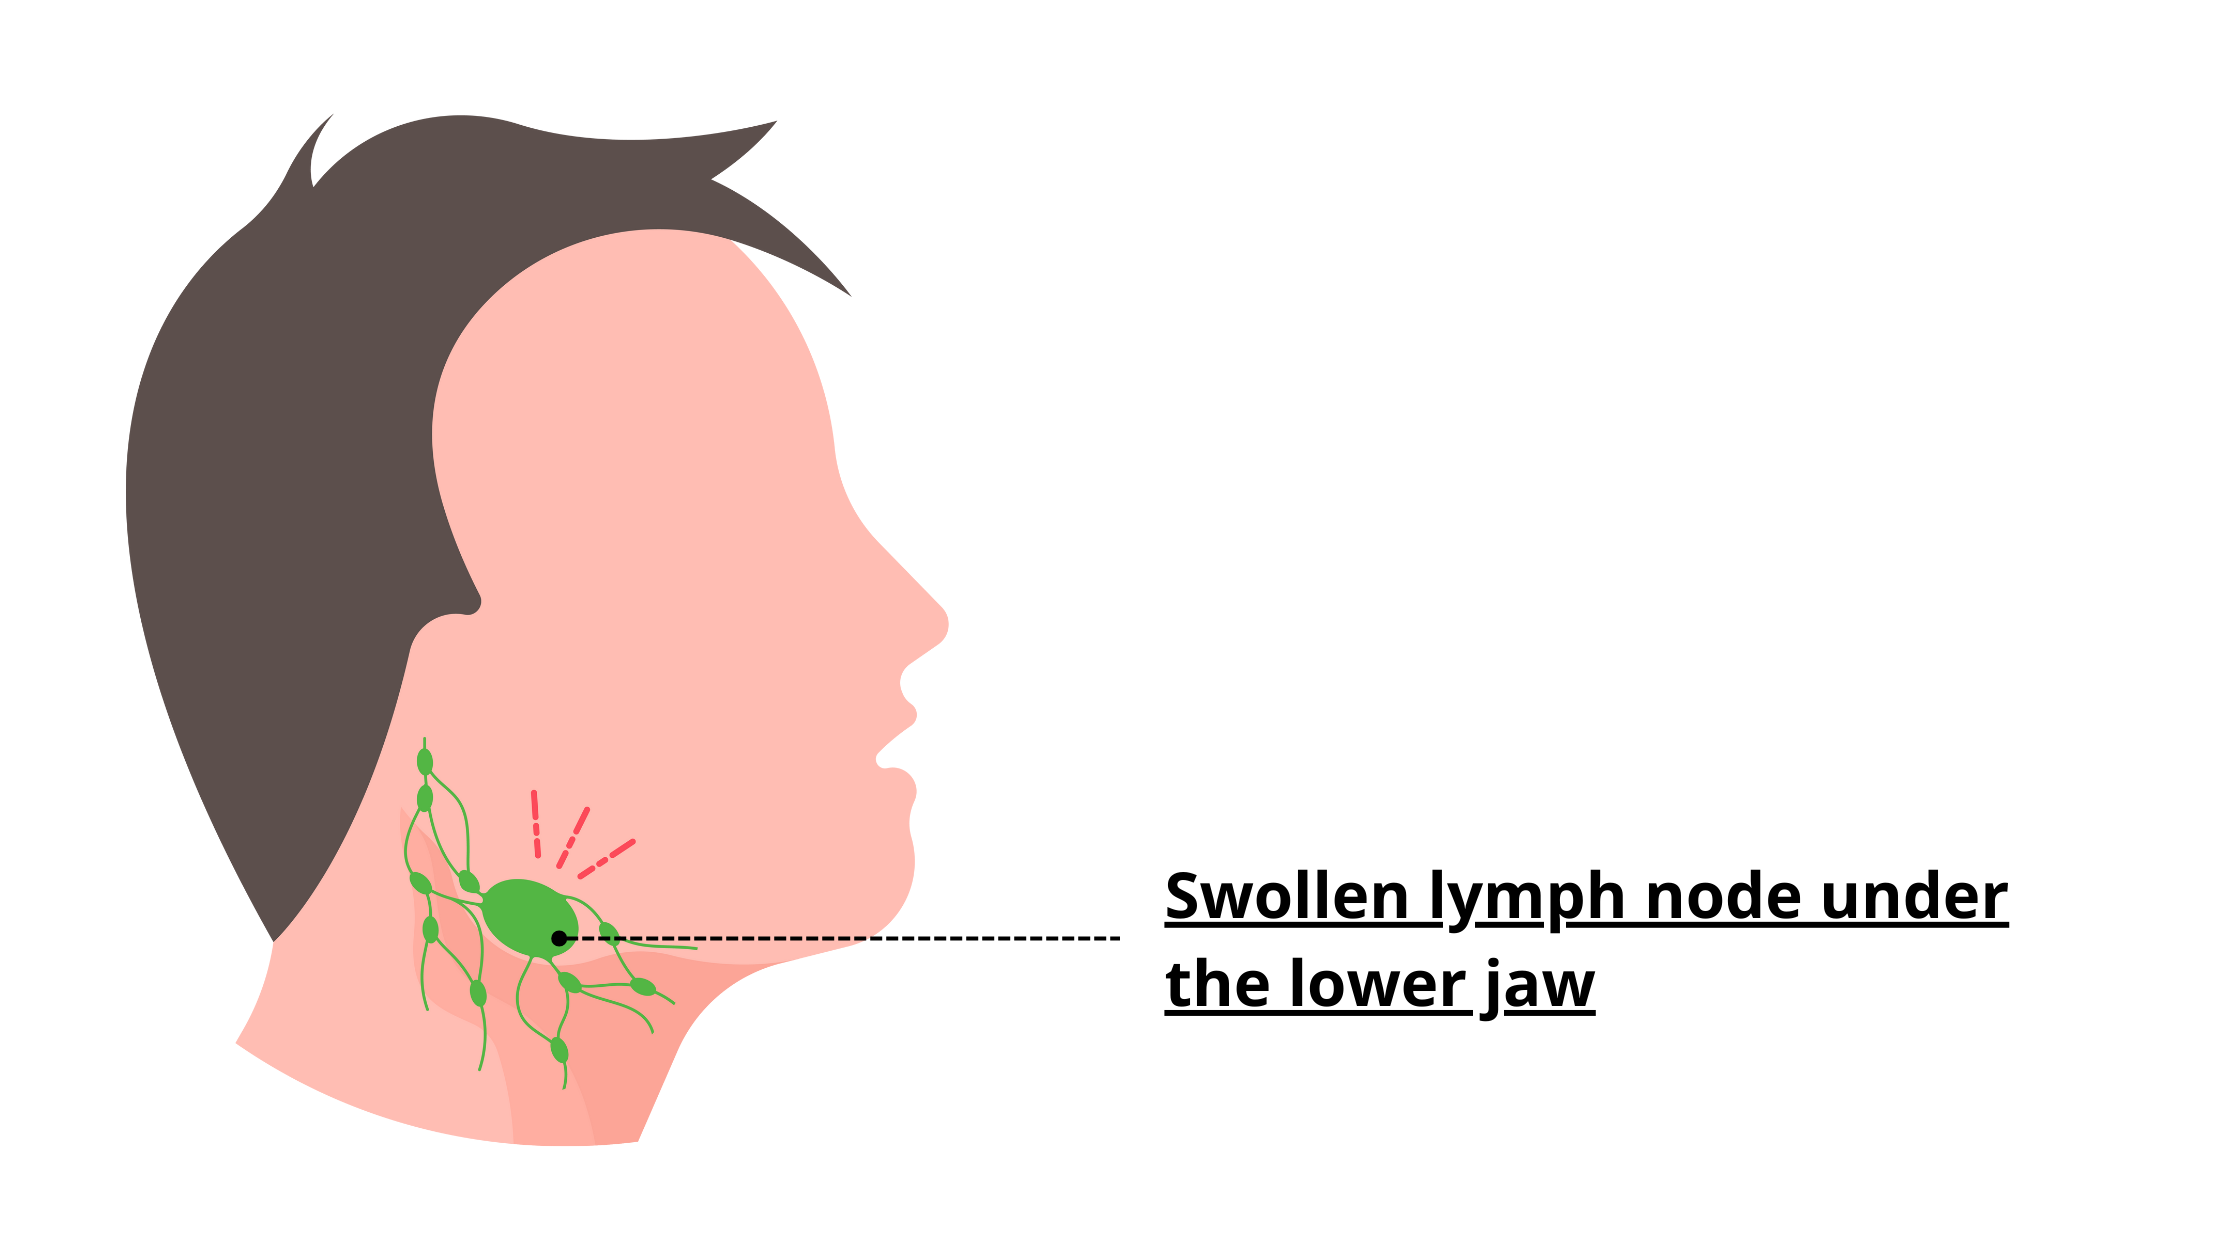 Lymph nodes of the lower jaw